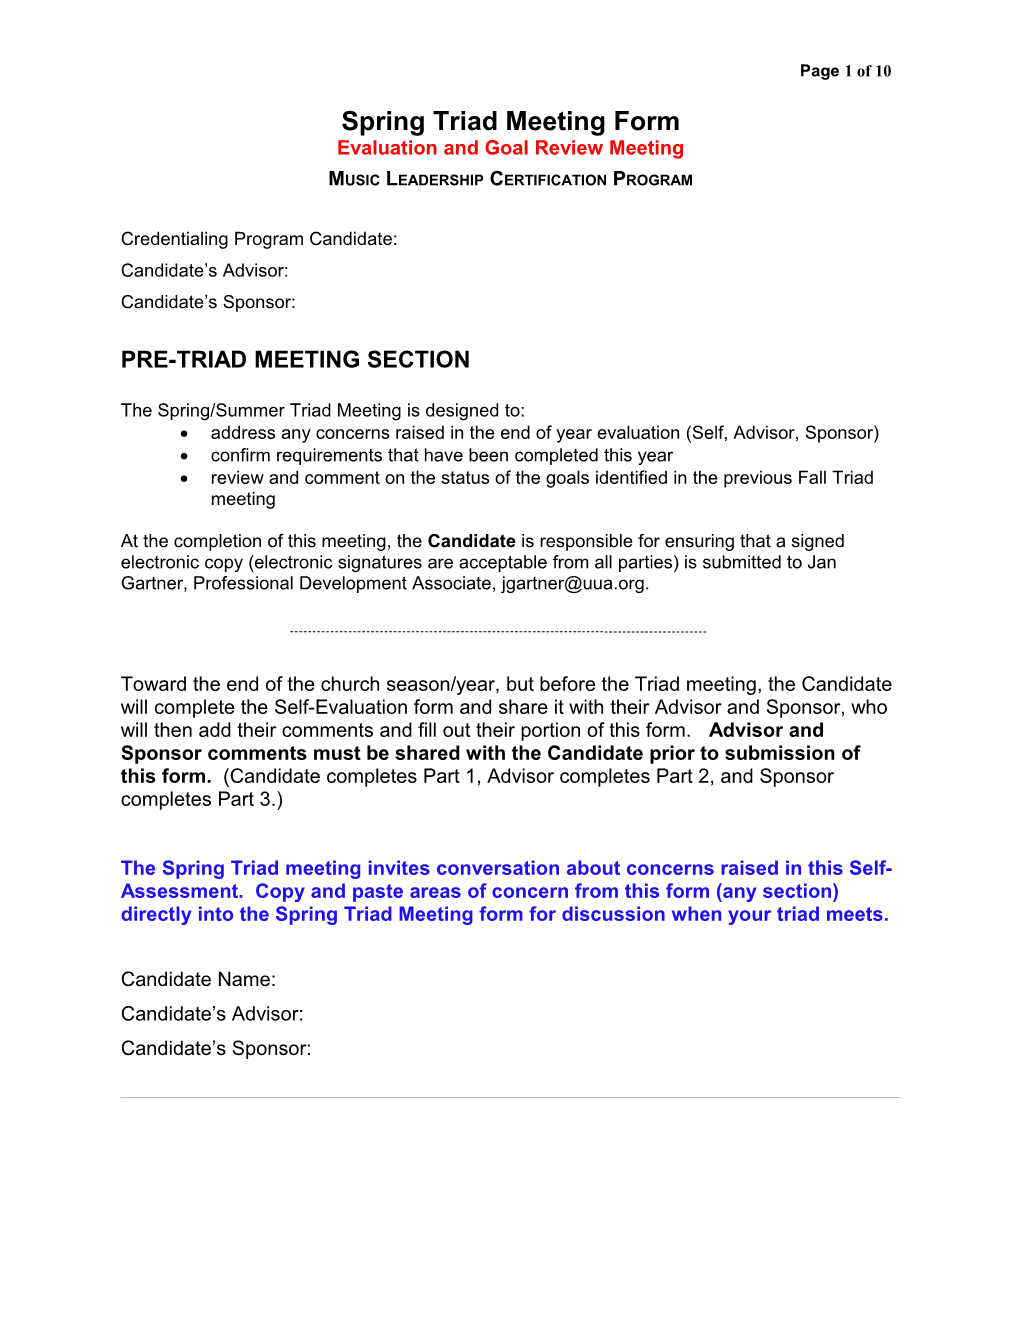 Triad Meeting Form for The